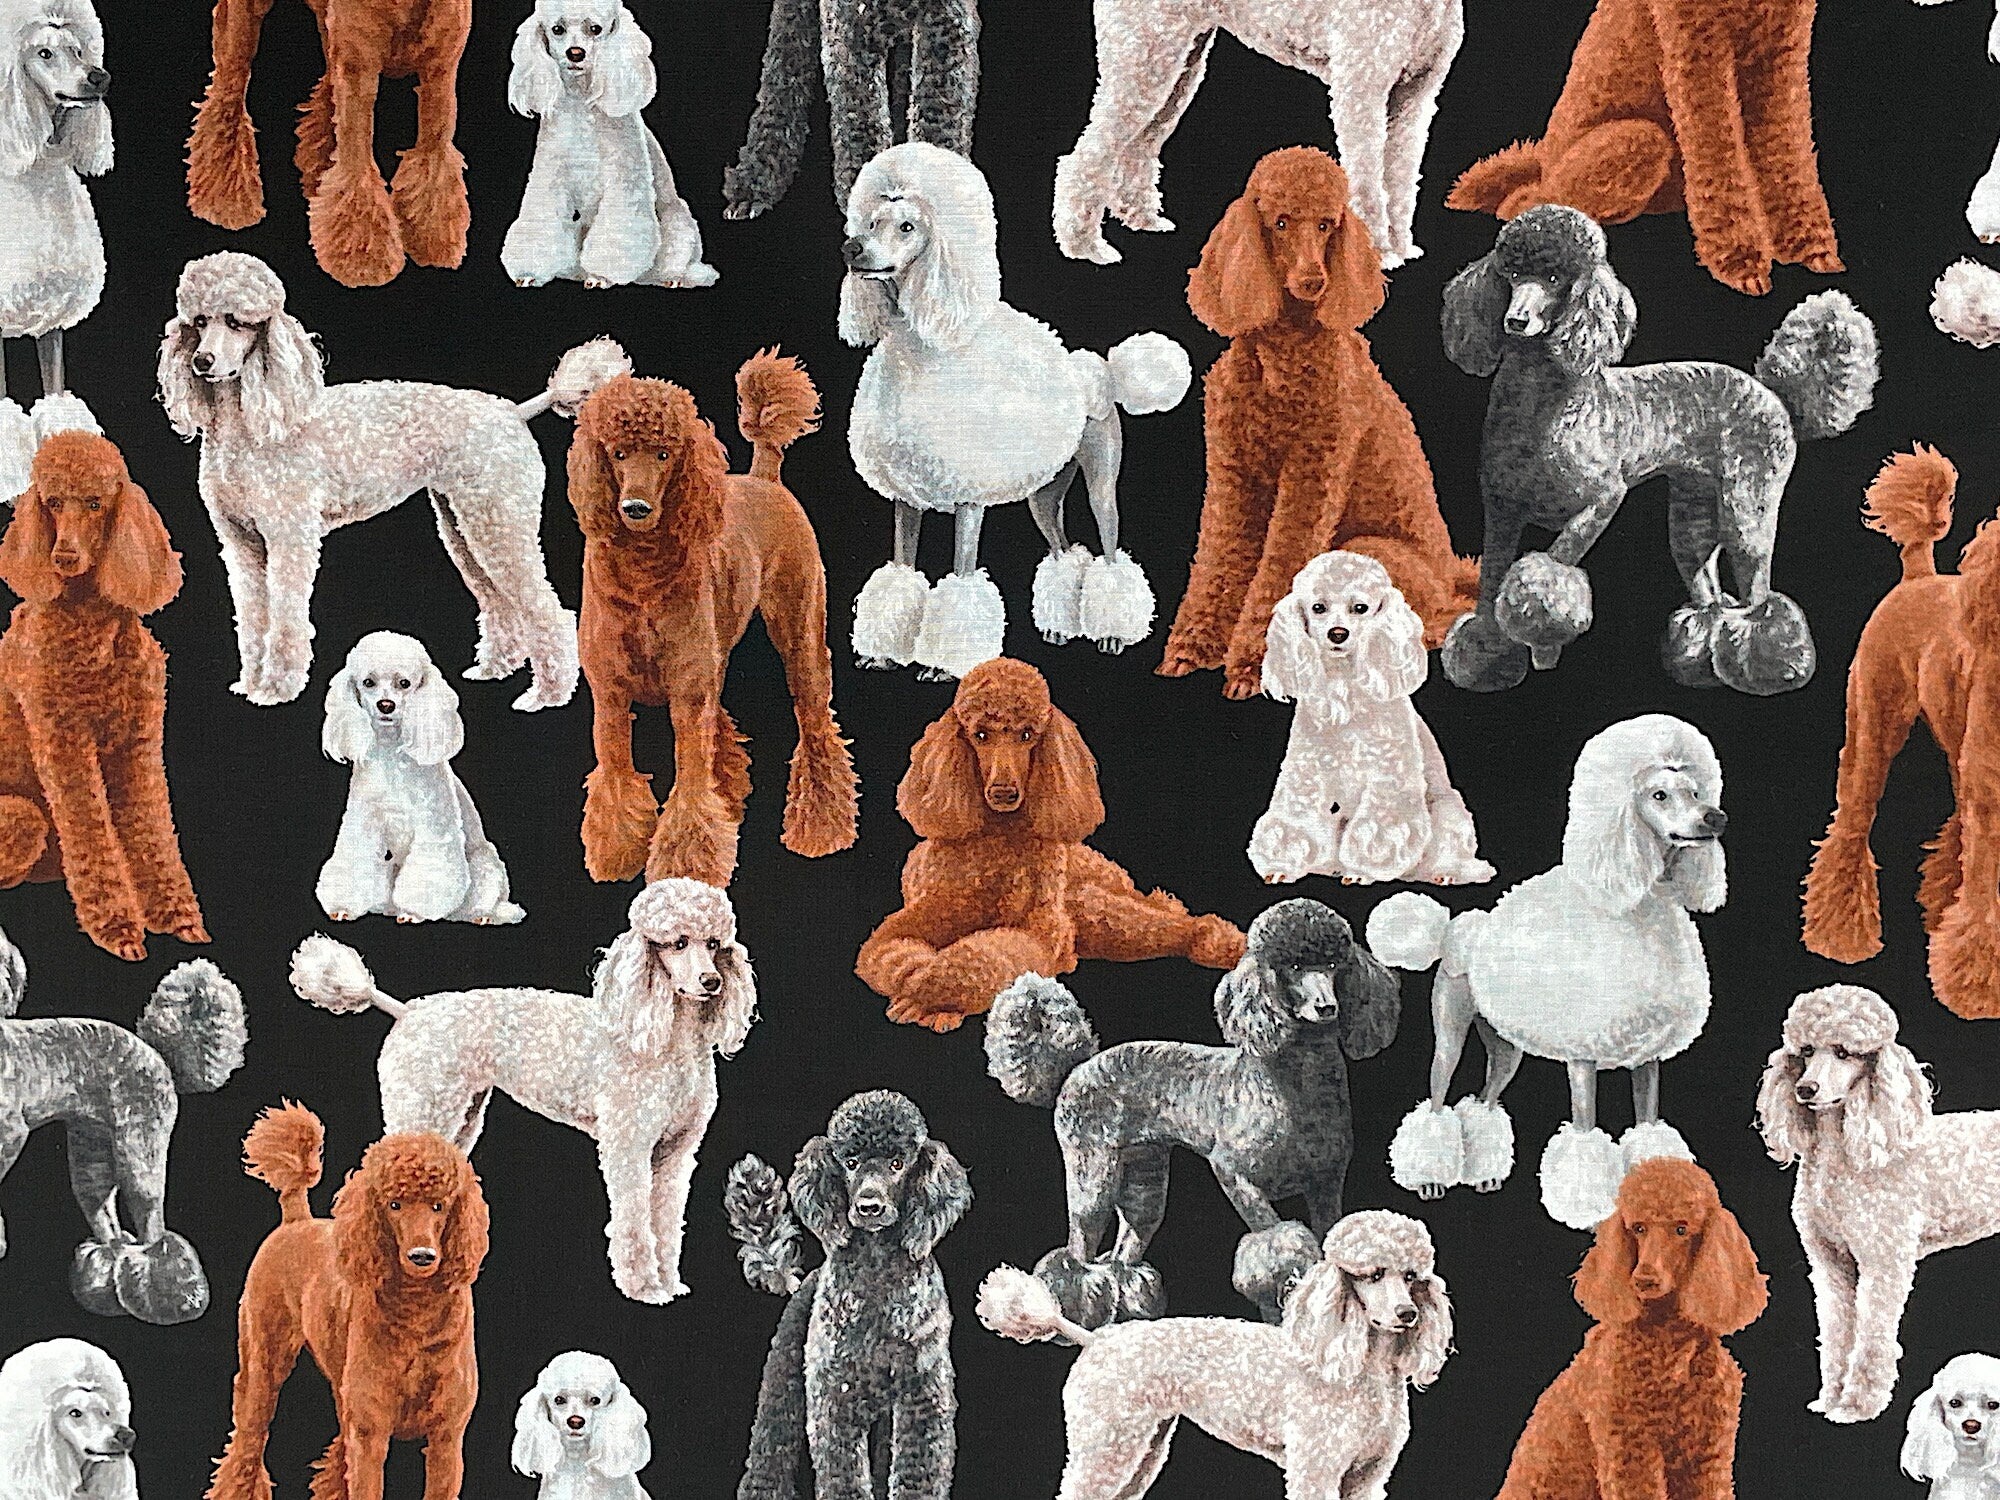 This black cotton fabric is covered with poodles. The poodles are brown, black, white and beige.